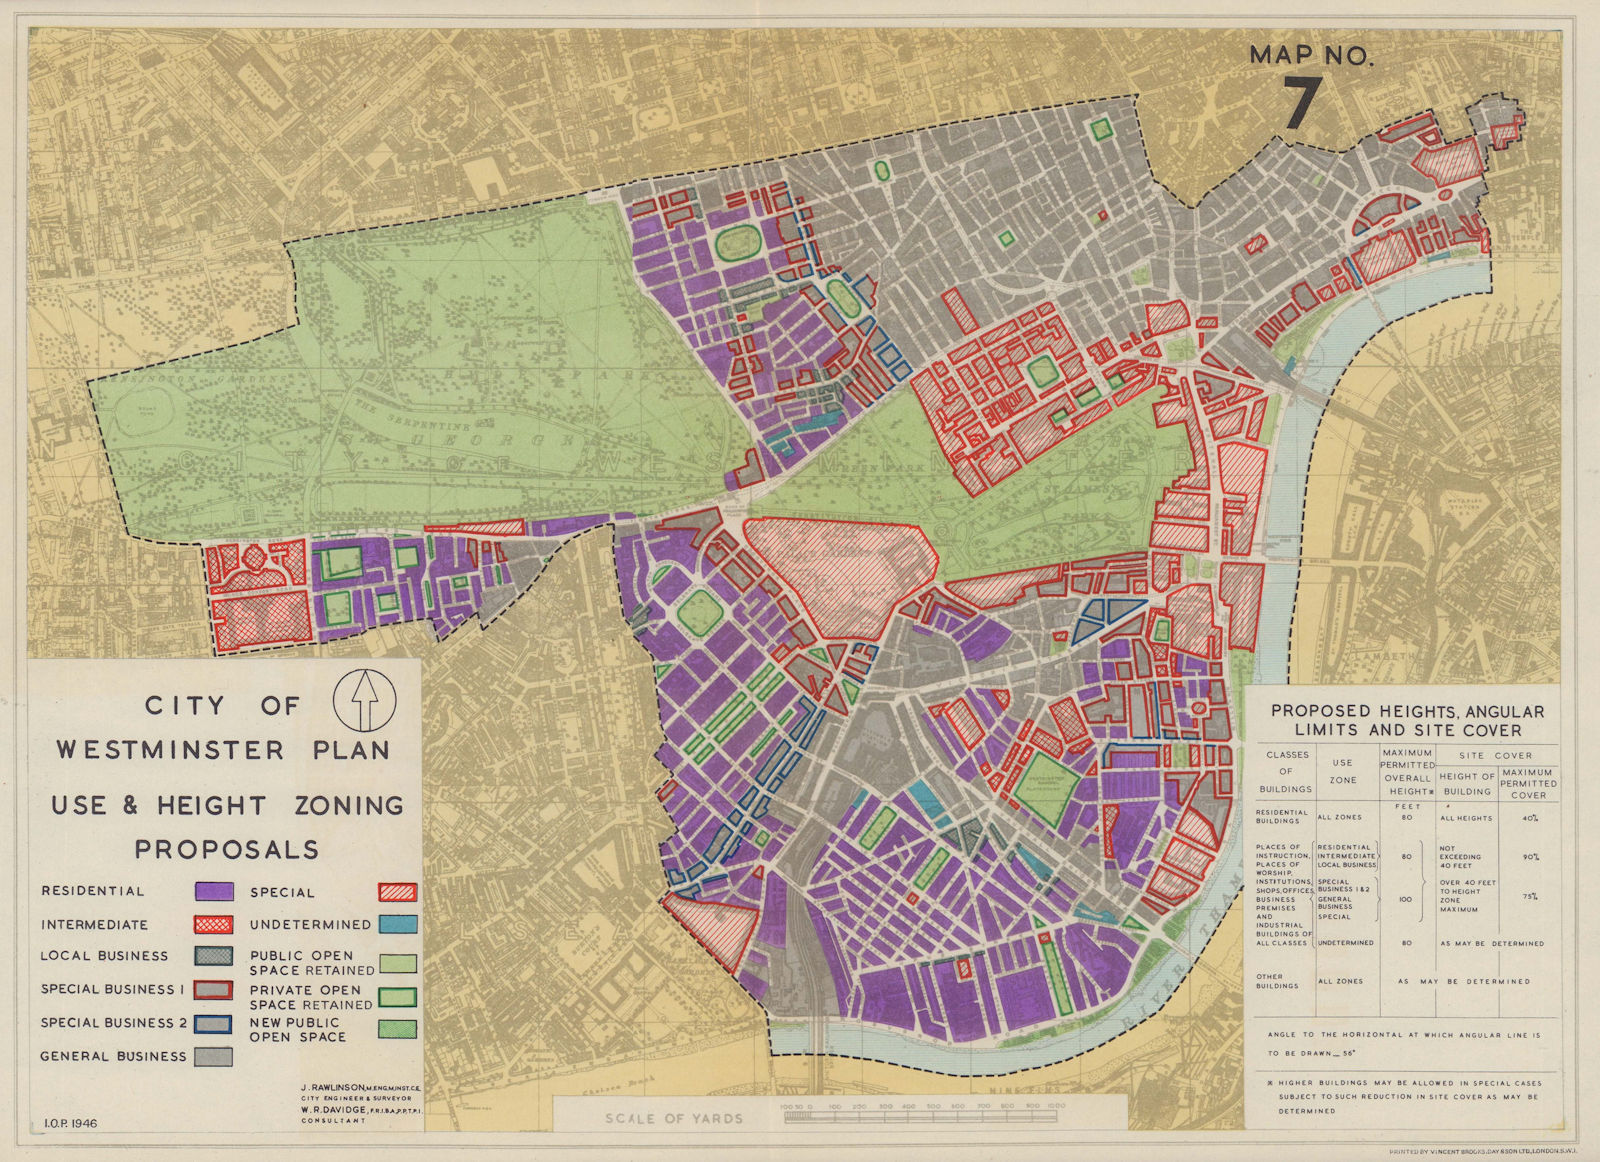 City of Westminster plan. Use & Height Zoning Proposals. RAWLINSON 1946 map